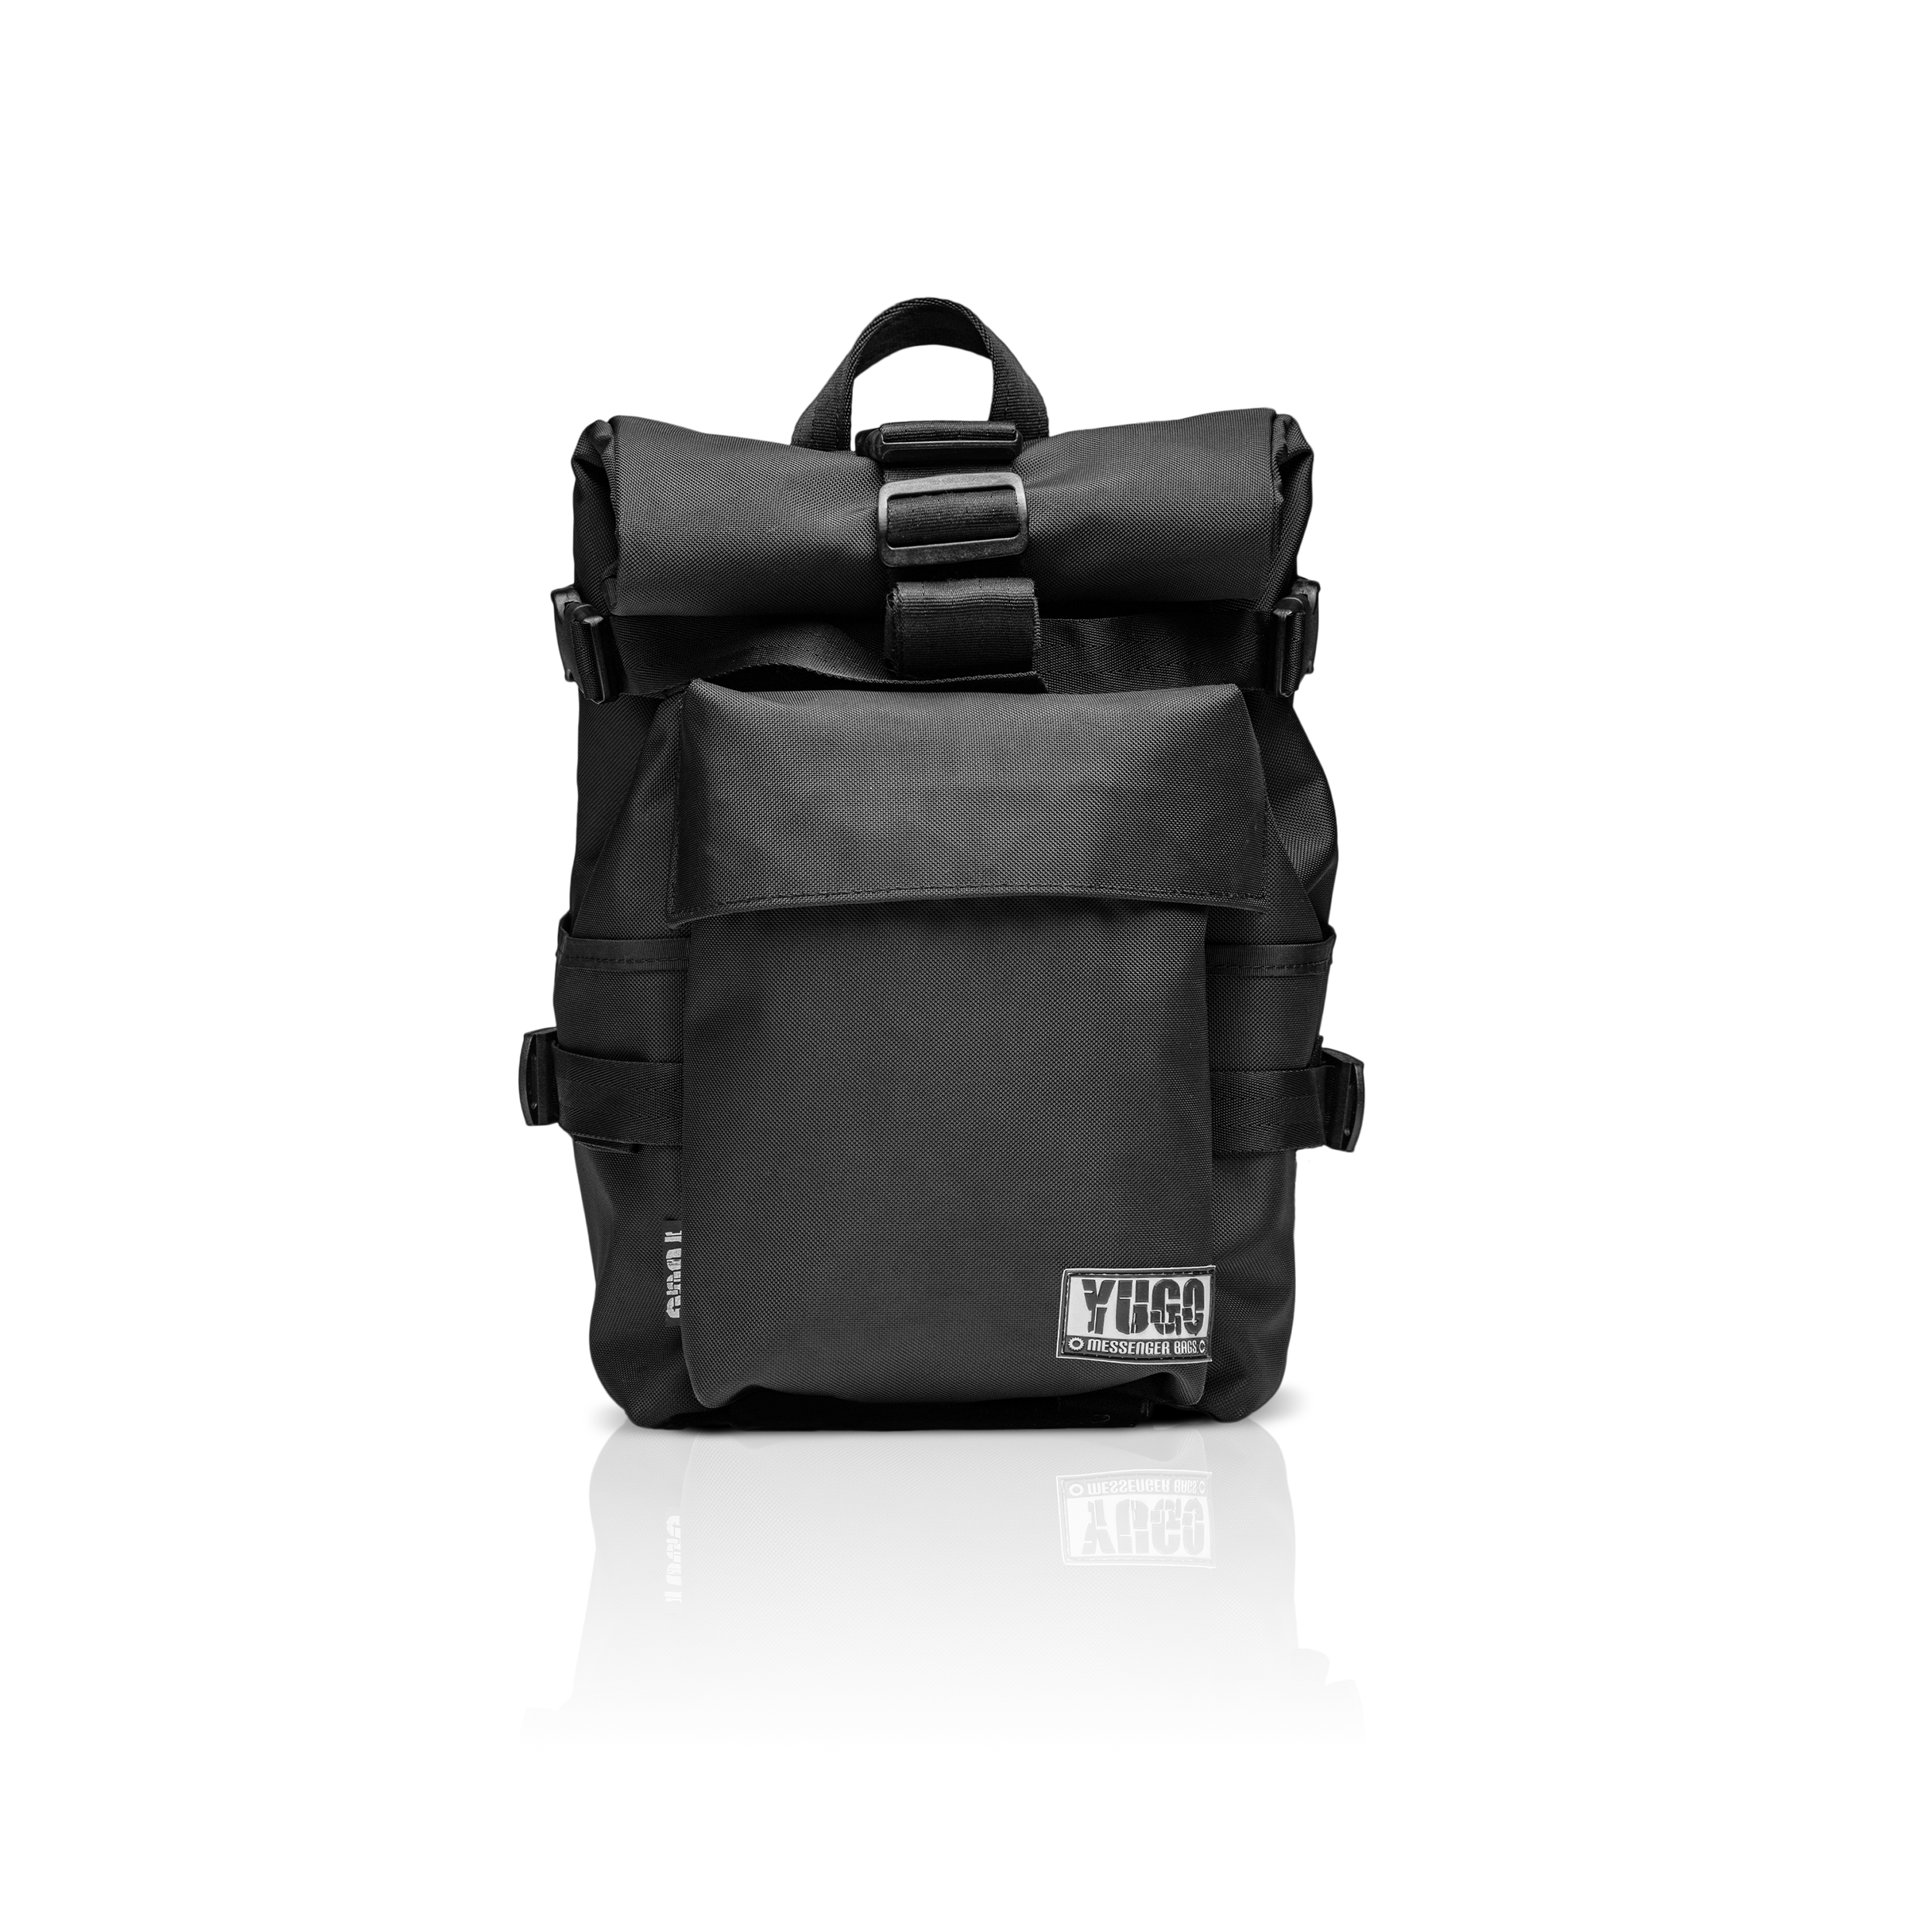 Roll Top Backpack - Cycling Products - Yugo Messenger Bags